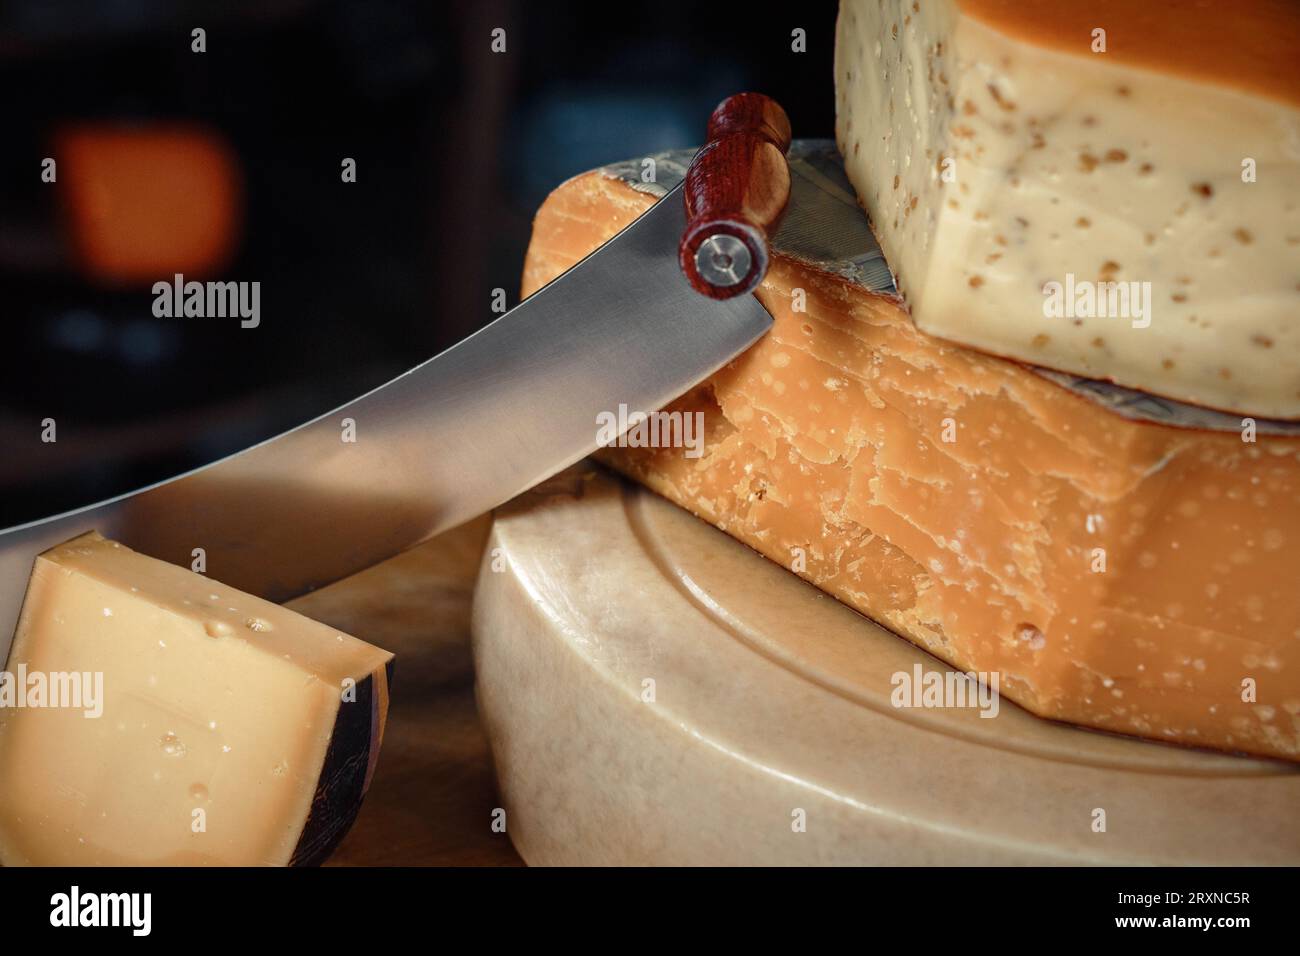 Cheese heads with slices and knives lie on a wooden board with an interior Stock Photo